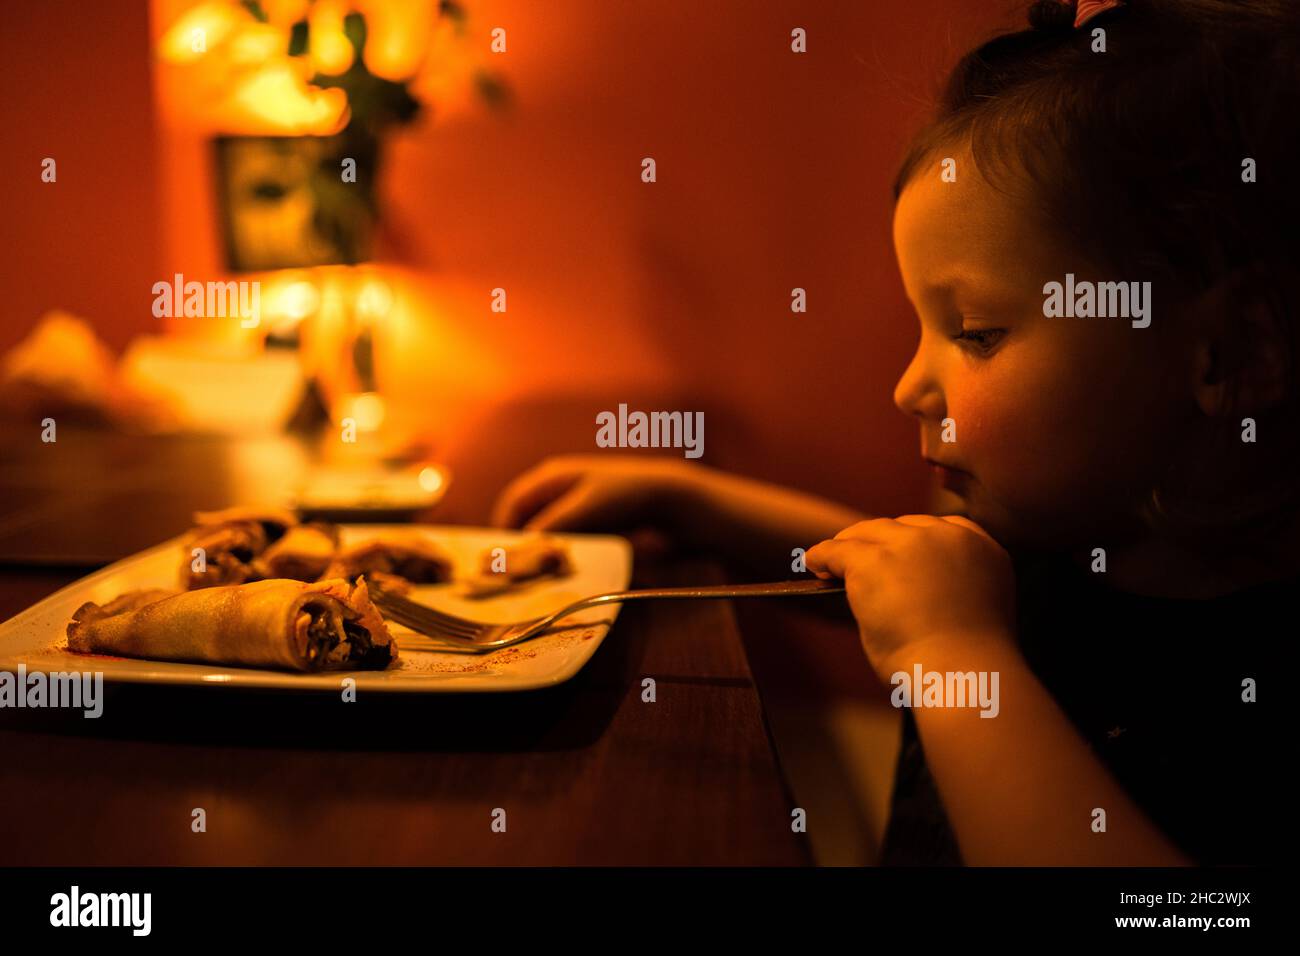 A moody shoot of a little girl eating a pancake in the restaurant. Stock Photo